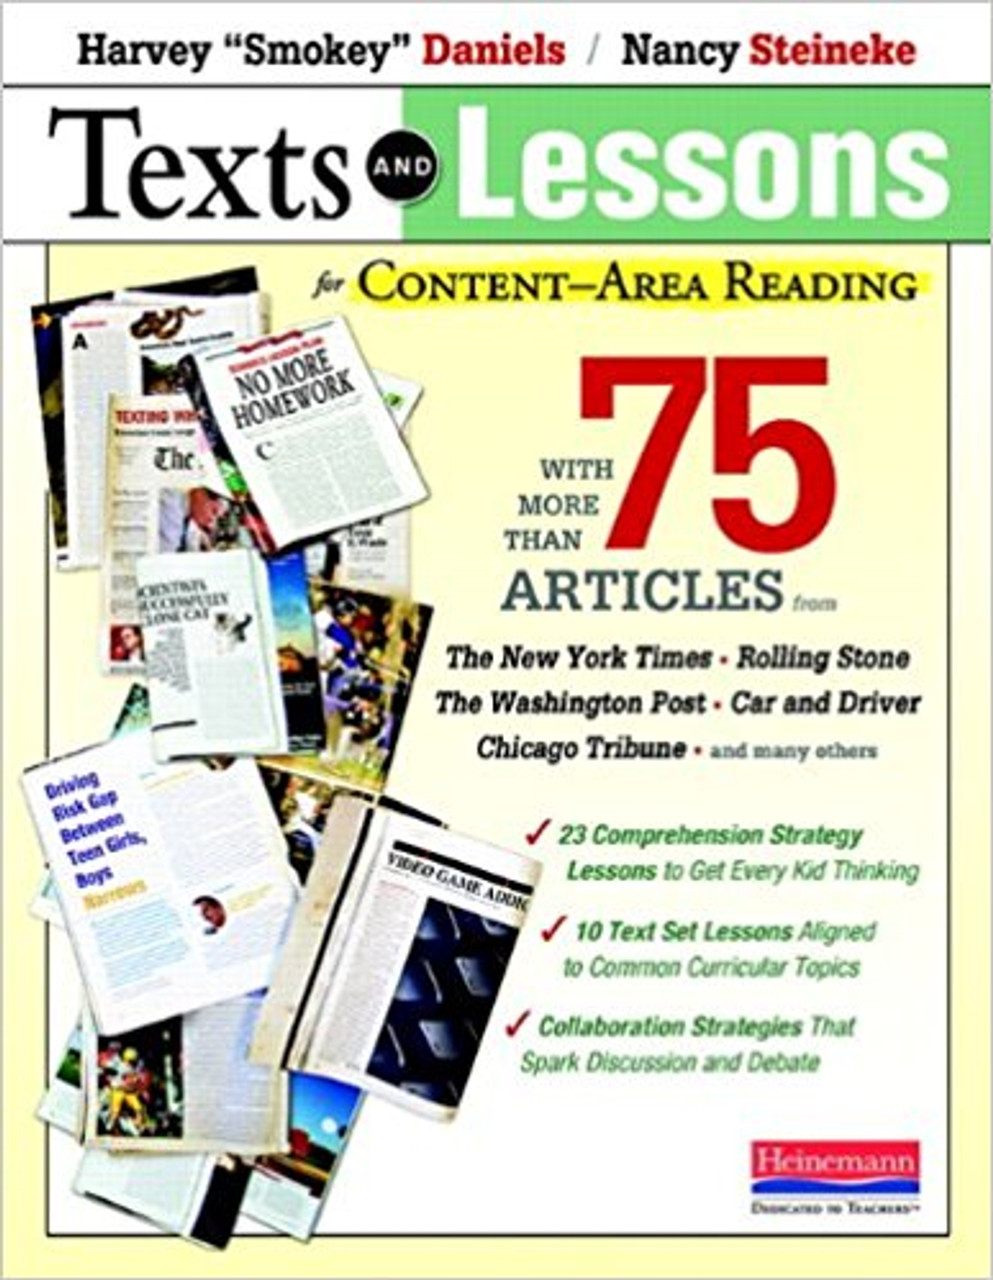 Texts and Lessons for Content-Area Writing: With More Than 50 Texts from National Geographic, the New York Times, Prevention, The Washington Post, Smithsonian, Harvard Business Review, and More by Harvey Daniels